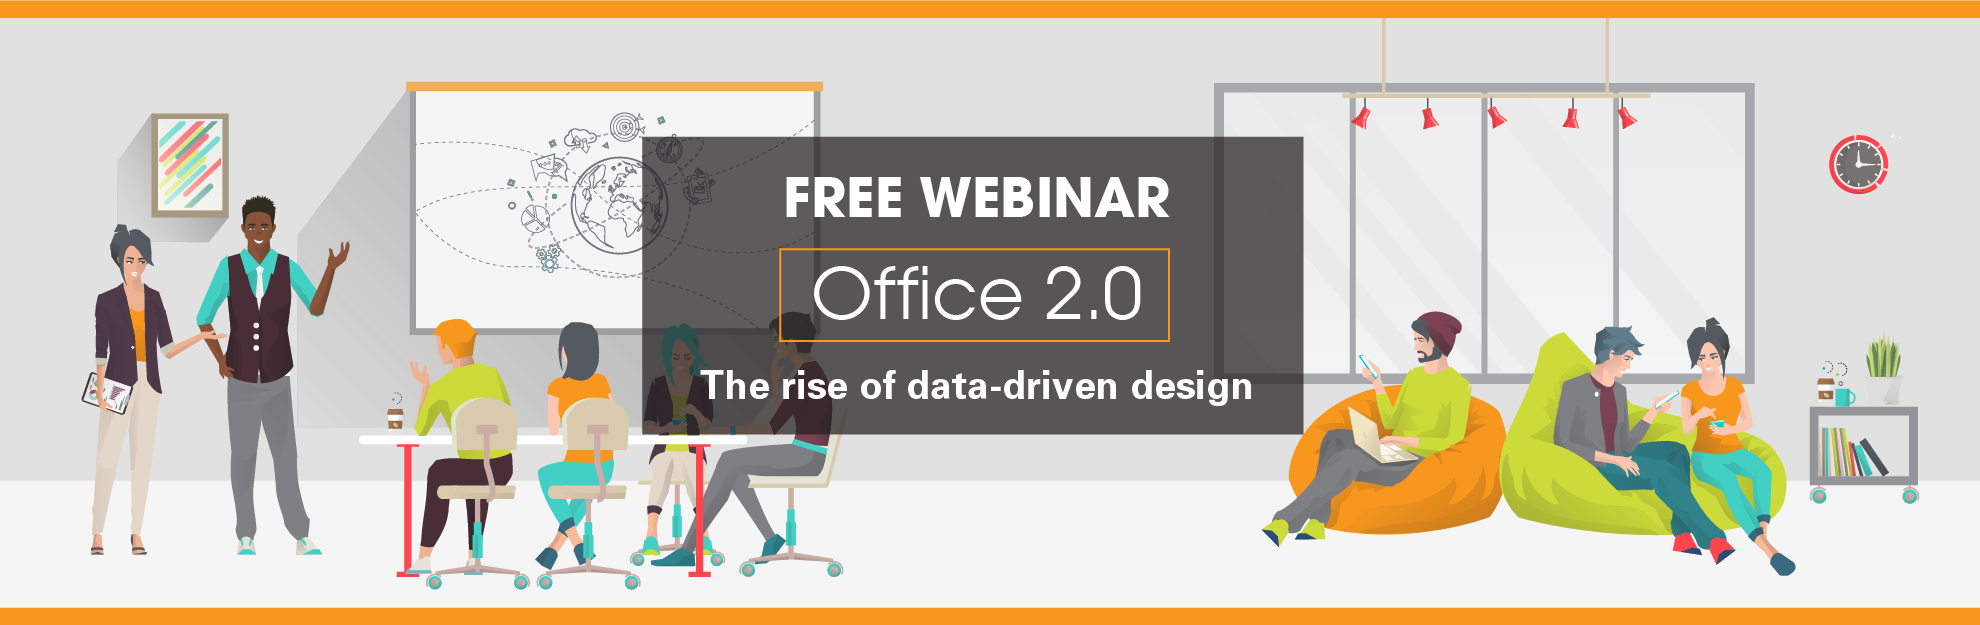 Office 2.0: The rise of data driven design